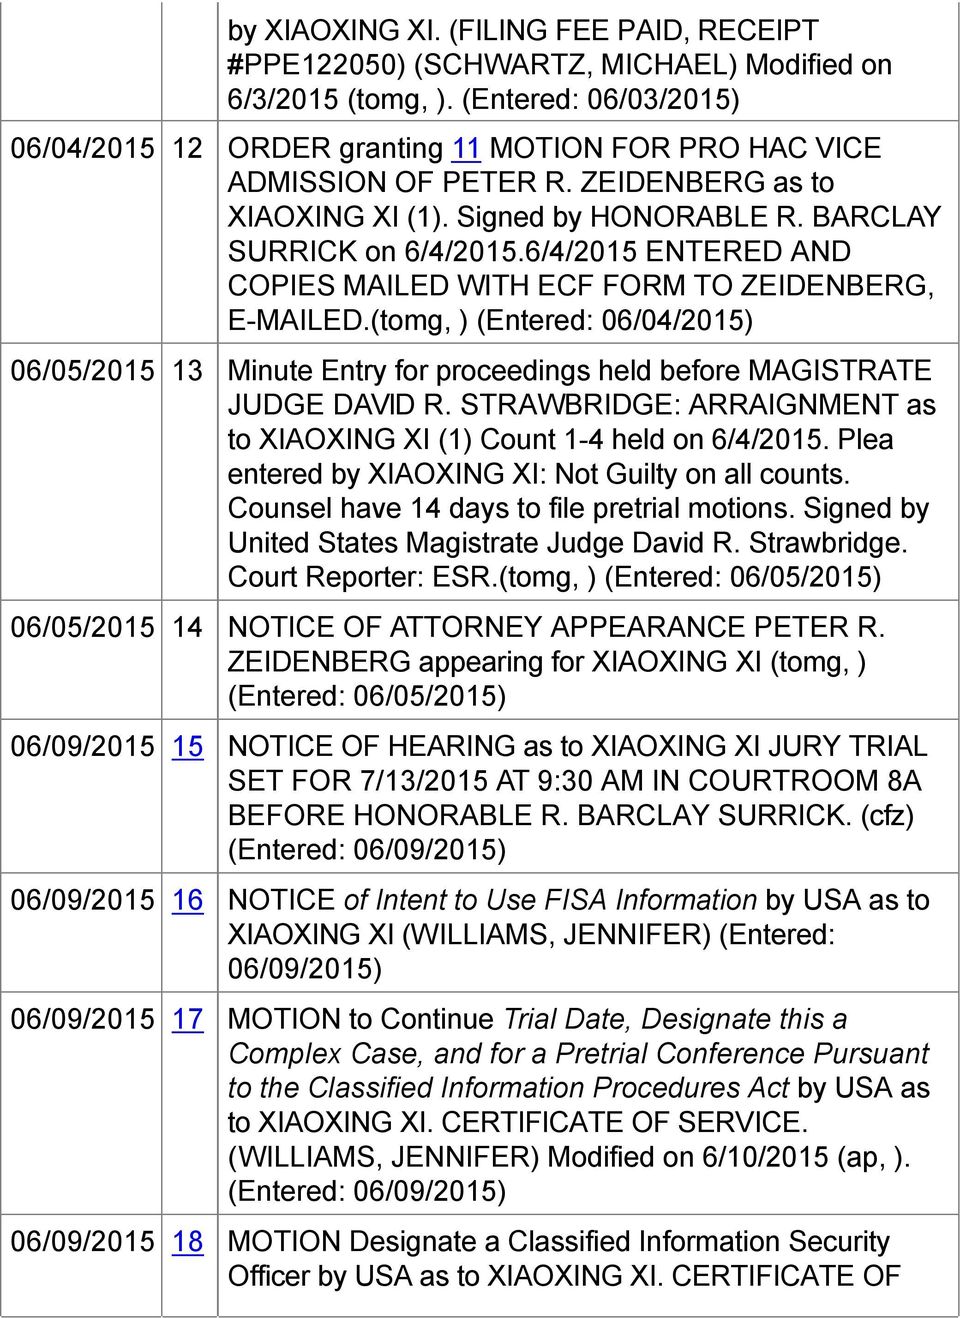 6/4/2015 ENTERED AND COPIES MAILED WITH ECF FORM TO ZEIDENBERG, E-MAILED.(tomg, ) (Entered: 06/04/2015) 06/05/2015 13 Minute Entry for proceedings held before MAGISTRATE JUDGE DAVID R.